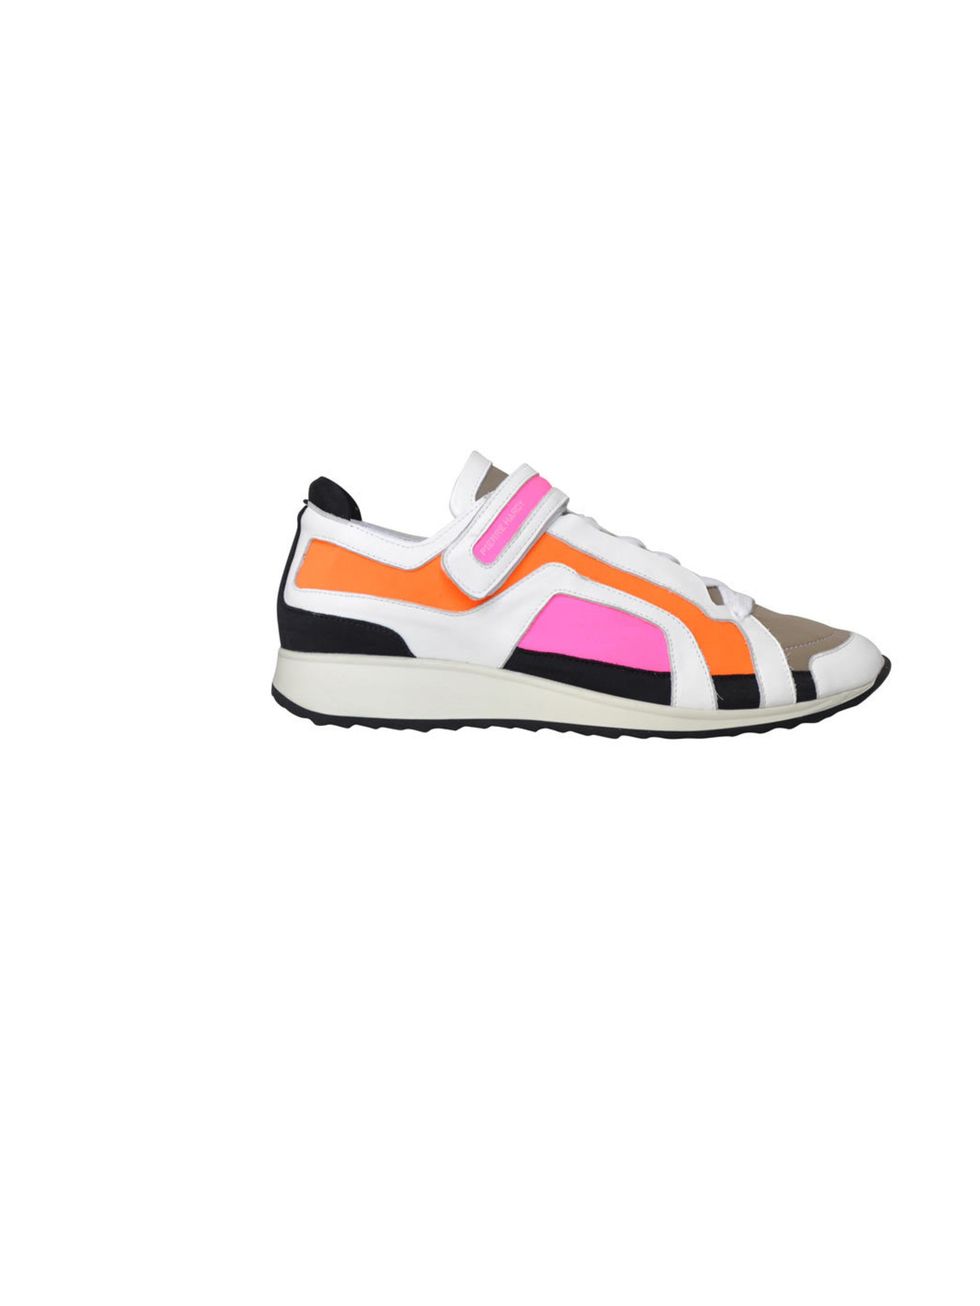 <p>Pierre Hardy two-tone leather and neon sneakers, £295, at Net-a-Porter</p><p><a href="http://shopping.elleuk.com/browse?fts=pierre+hardy">BUY NOW</a></p>